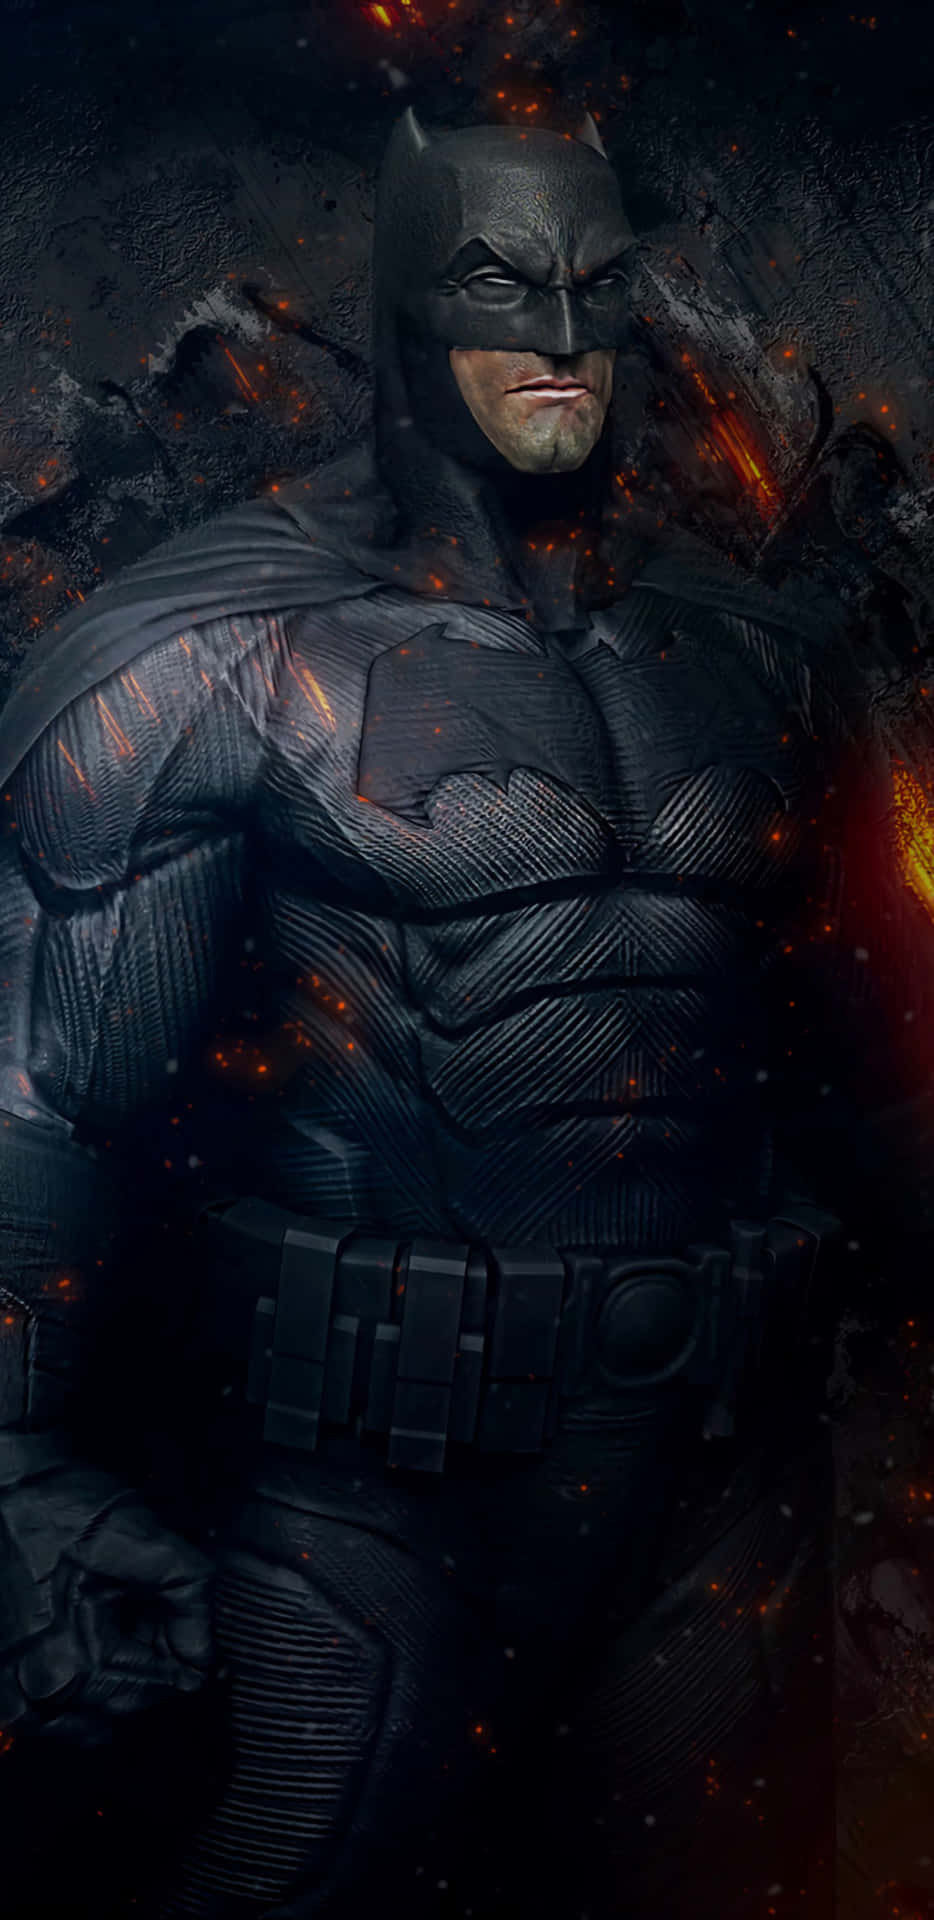 Join Batman's journey as he uses his Android against evil. Wallpaper